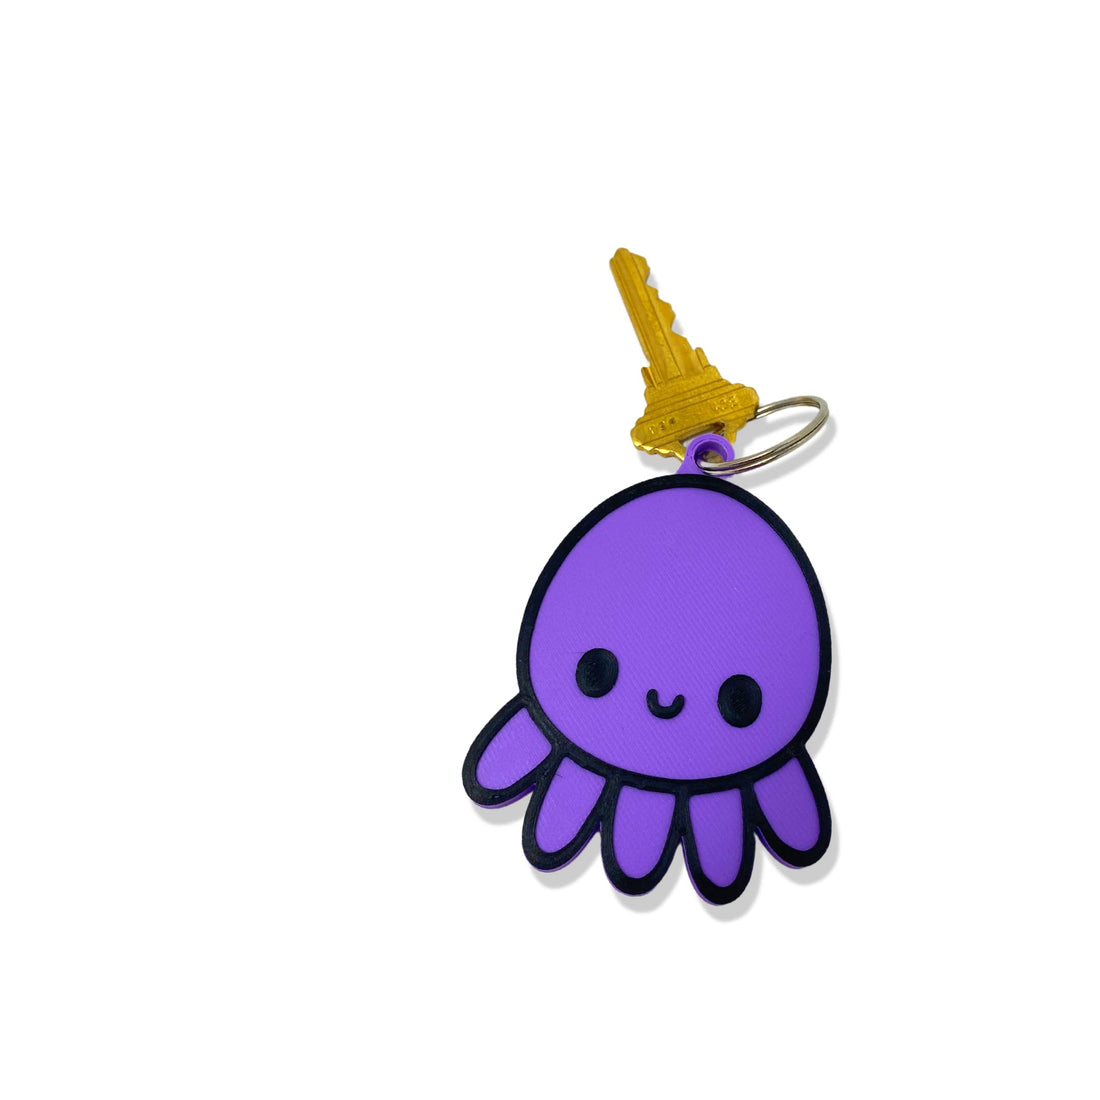 Cute Kawaii Octopus Keychain - Perfect for Hanging your keys. Decorate your Backpacks, Lunchboxes, Luggage, & Tote Bags Octopus